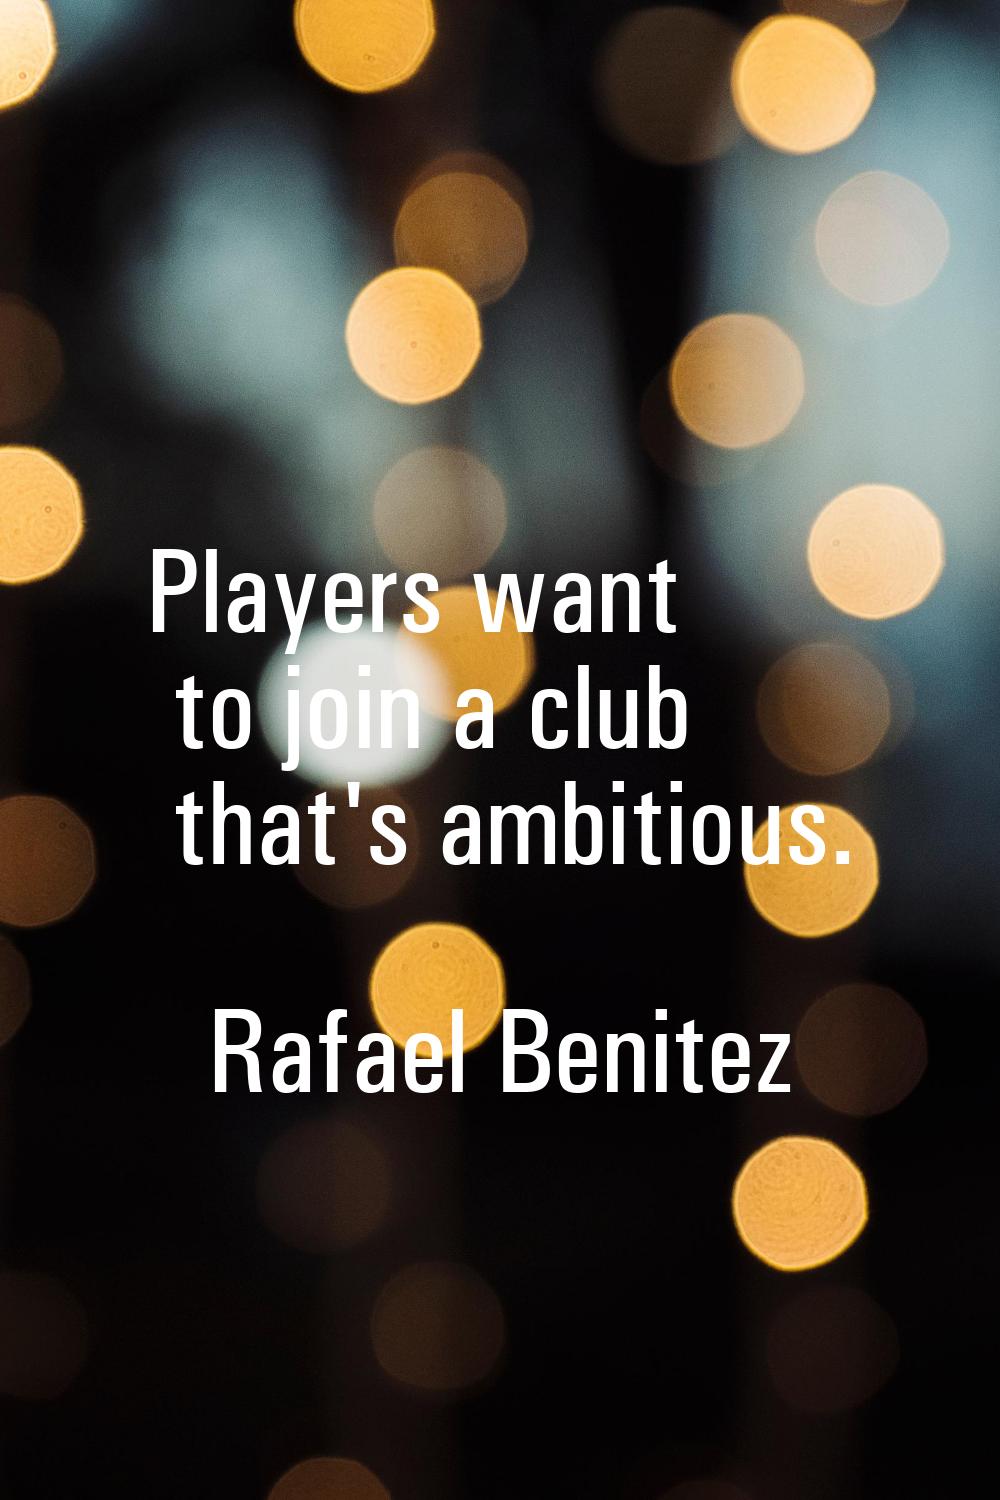 Players want to join a club that's ambitious.